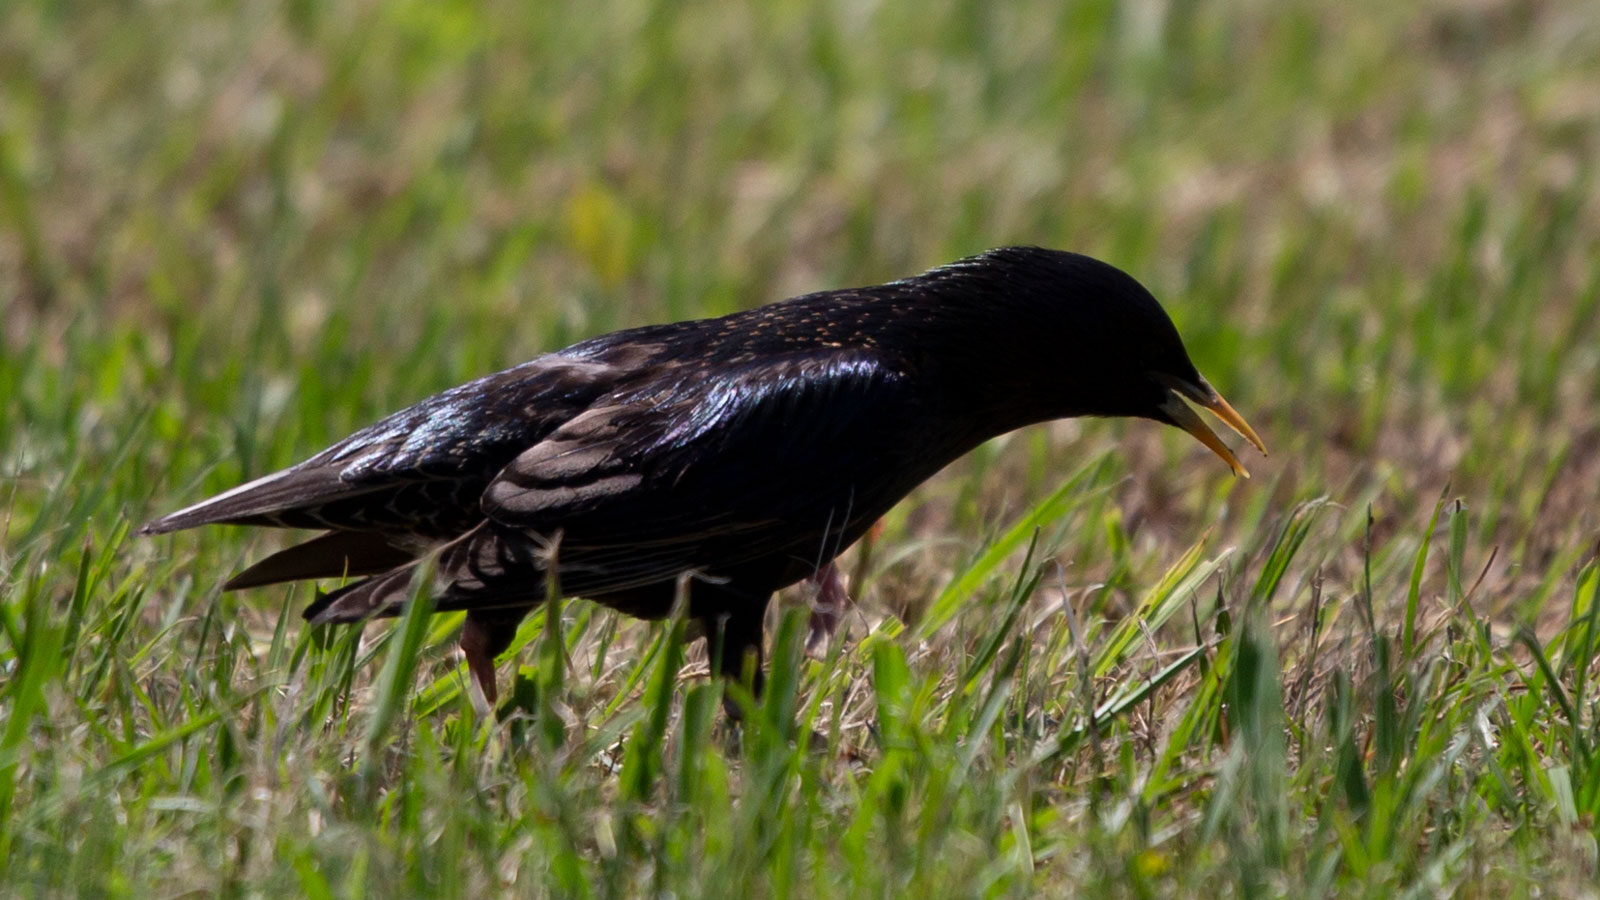 European starling foraging on a well-manicured lawn